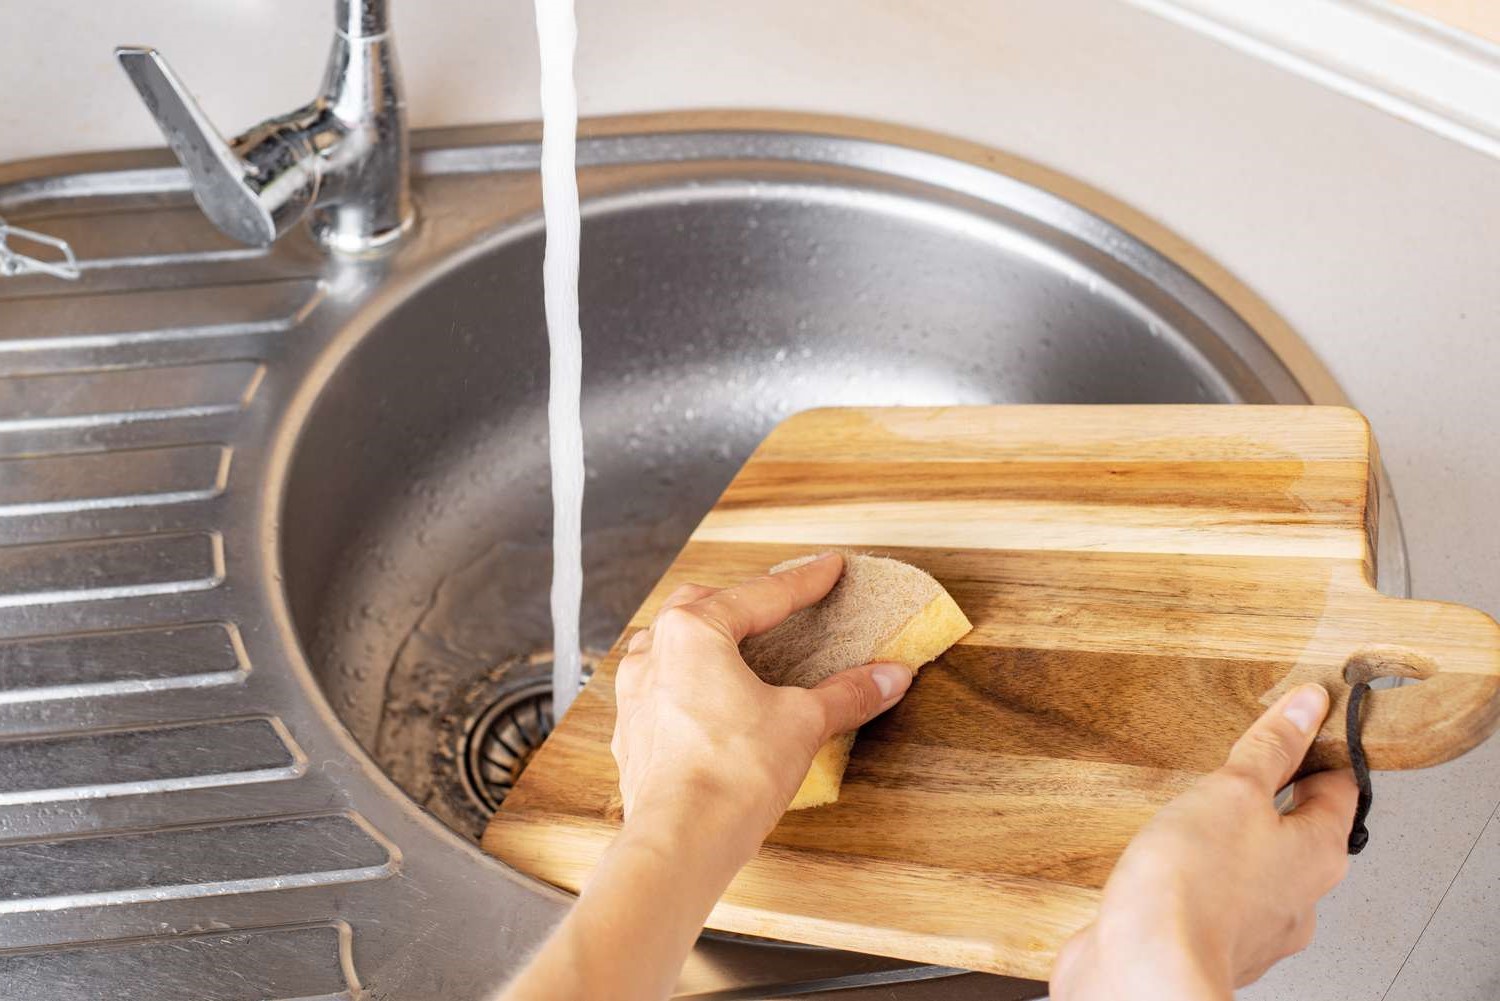 How To Clean Wooden Cutting Board